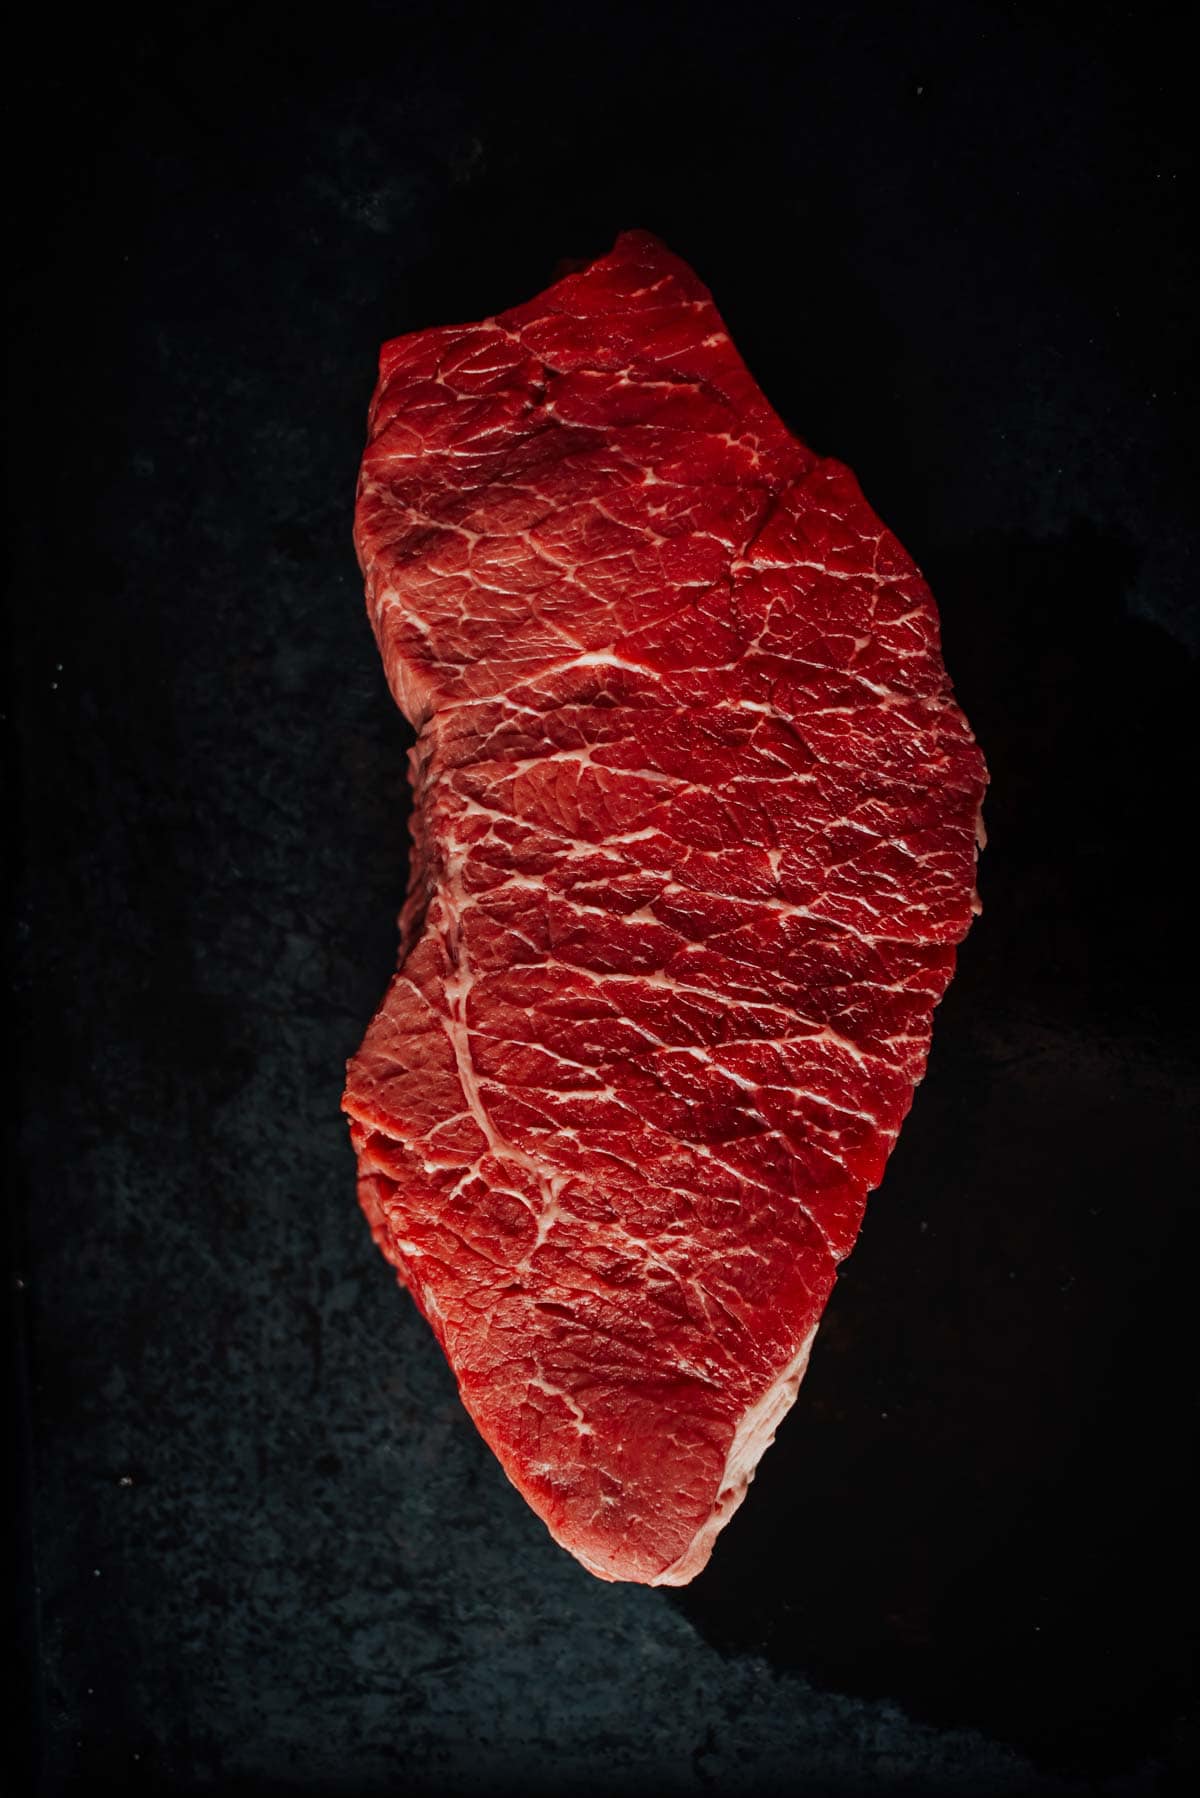 A raw, london broil steak against a dark background. The meat has a deep red color with visible marbling.